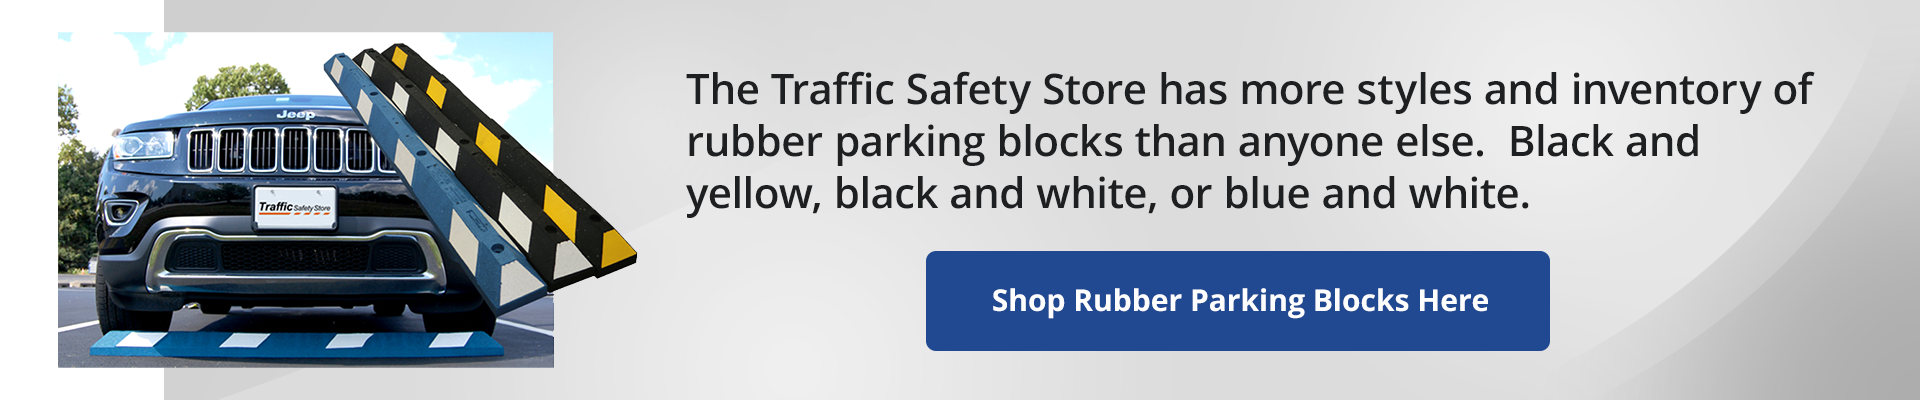 The traffic safety store has more styles and inventory of rubber parking blocks than anyone else. Black and yellow, black and white, or blue and white. Shop Rubber Parking blocks here.